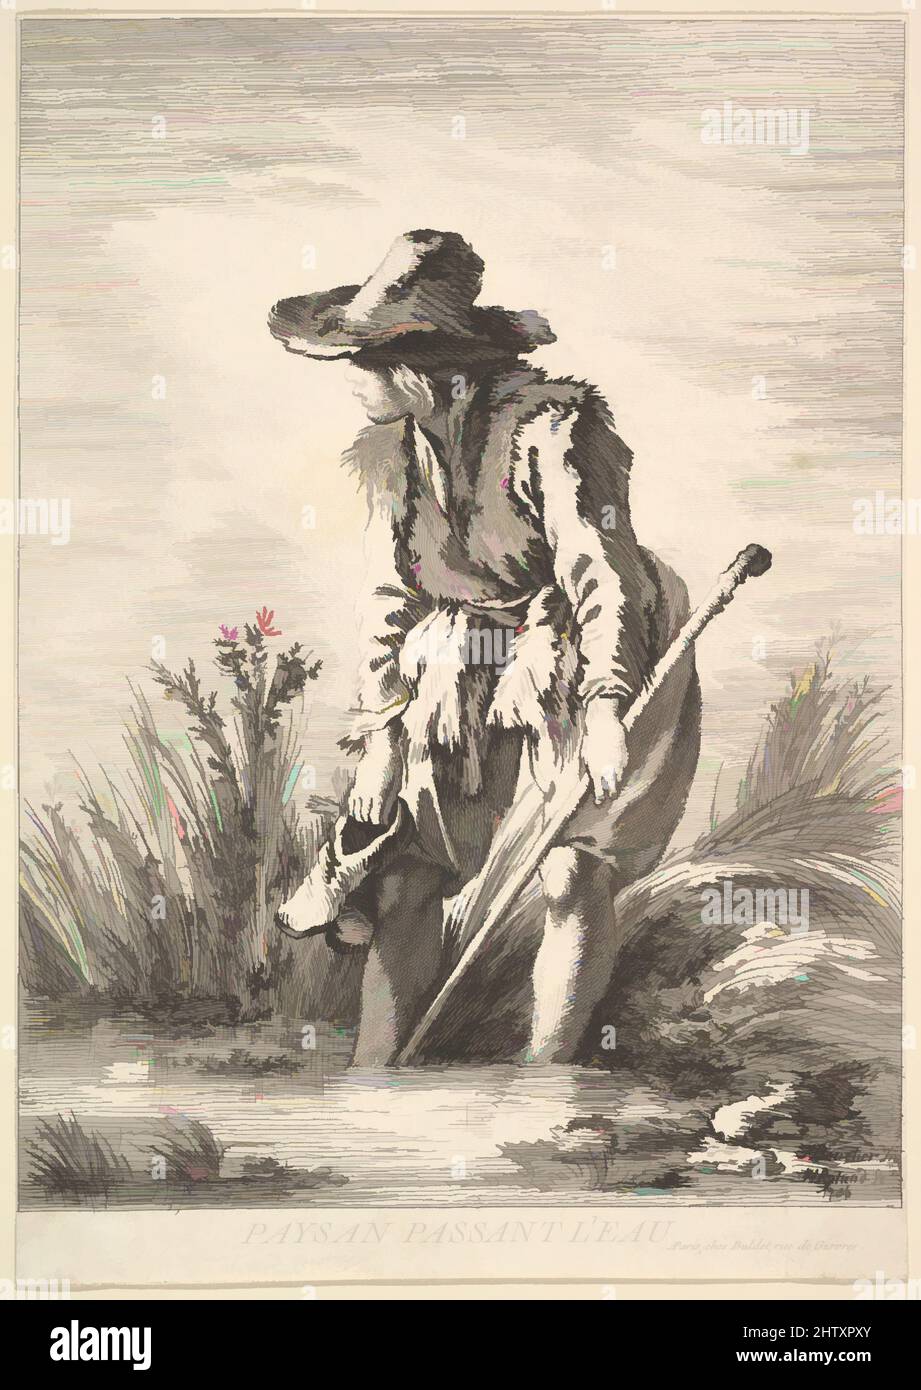 Art inspired by Peasant Crossing Water, 1786, Etching and engraving, sheet: 9 1/2 x 6 11/16 in. (24.2 x 17 cm), Prints, William Wynne Ryland (British, baptized London 1732–1783 London), After François Boucher (French, Paris 1703–1770 Paris, Classic works modernized by Artotop with a splash of modernity. Shapes, color and value, eye-catching visual impact on art. Emotions through freedom of artworks in a contemporary way. A timeless message pursuing a wildly creative new direction. Artists turning to the digital medium and creating the Artotop NFT Stock Photo